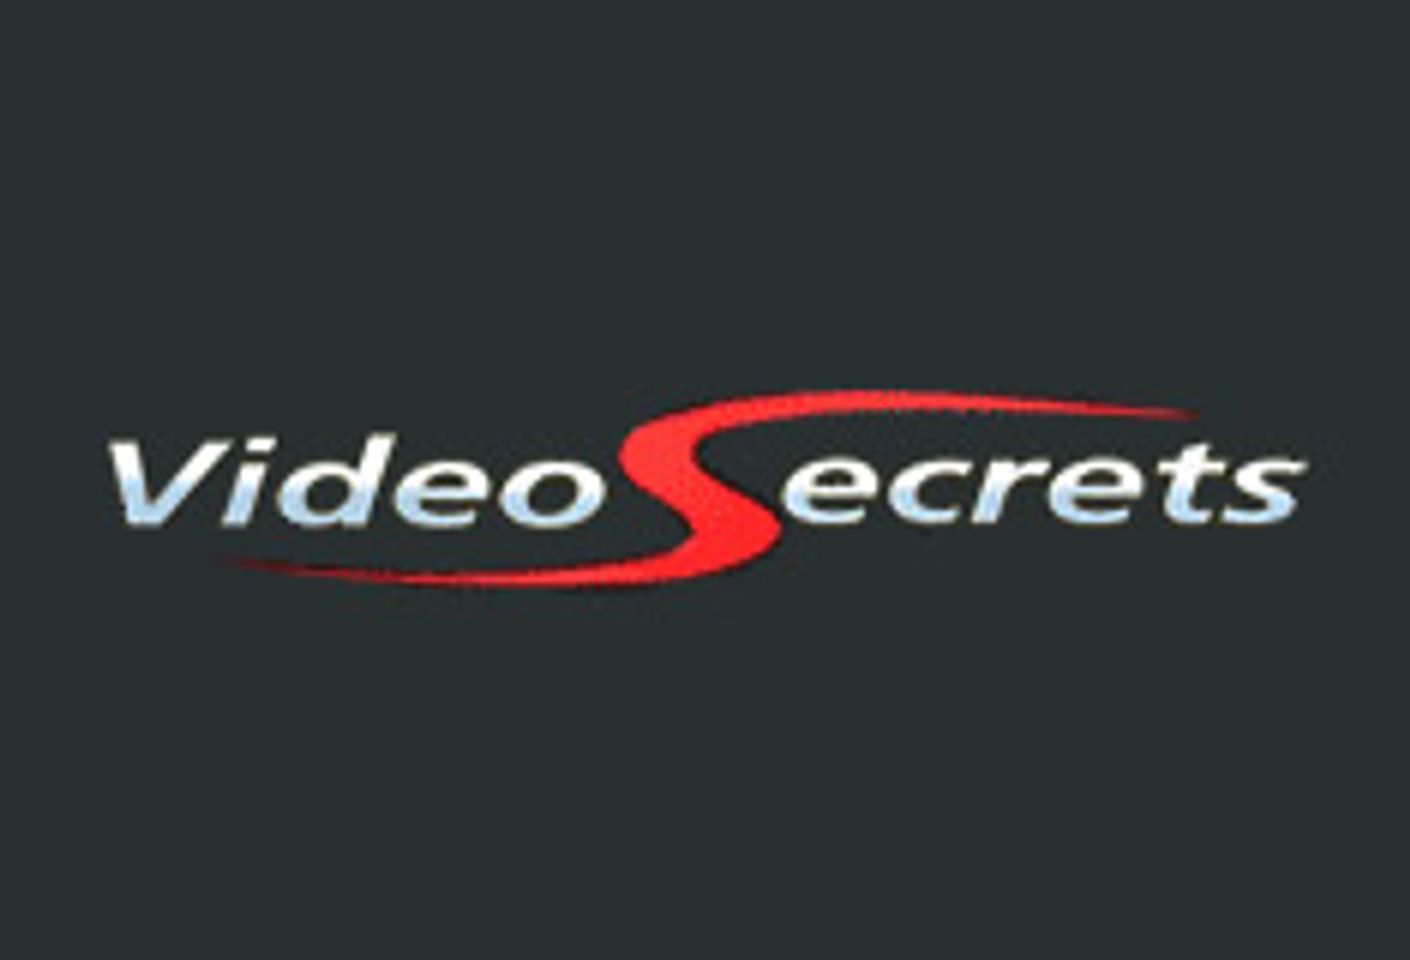 VideoSecrets Signs Ron Jeremy to Exclusive Online Chat Deal